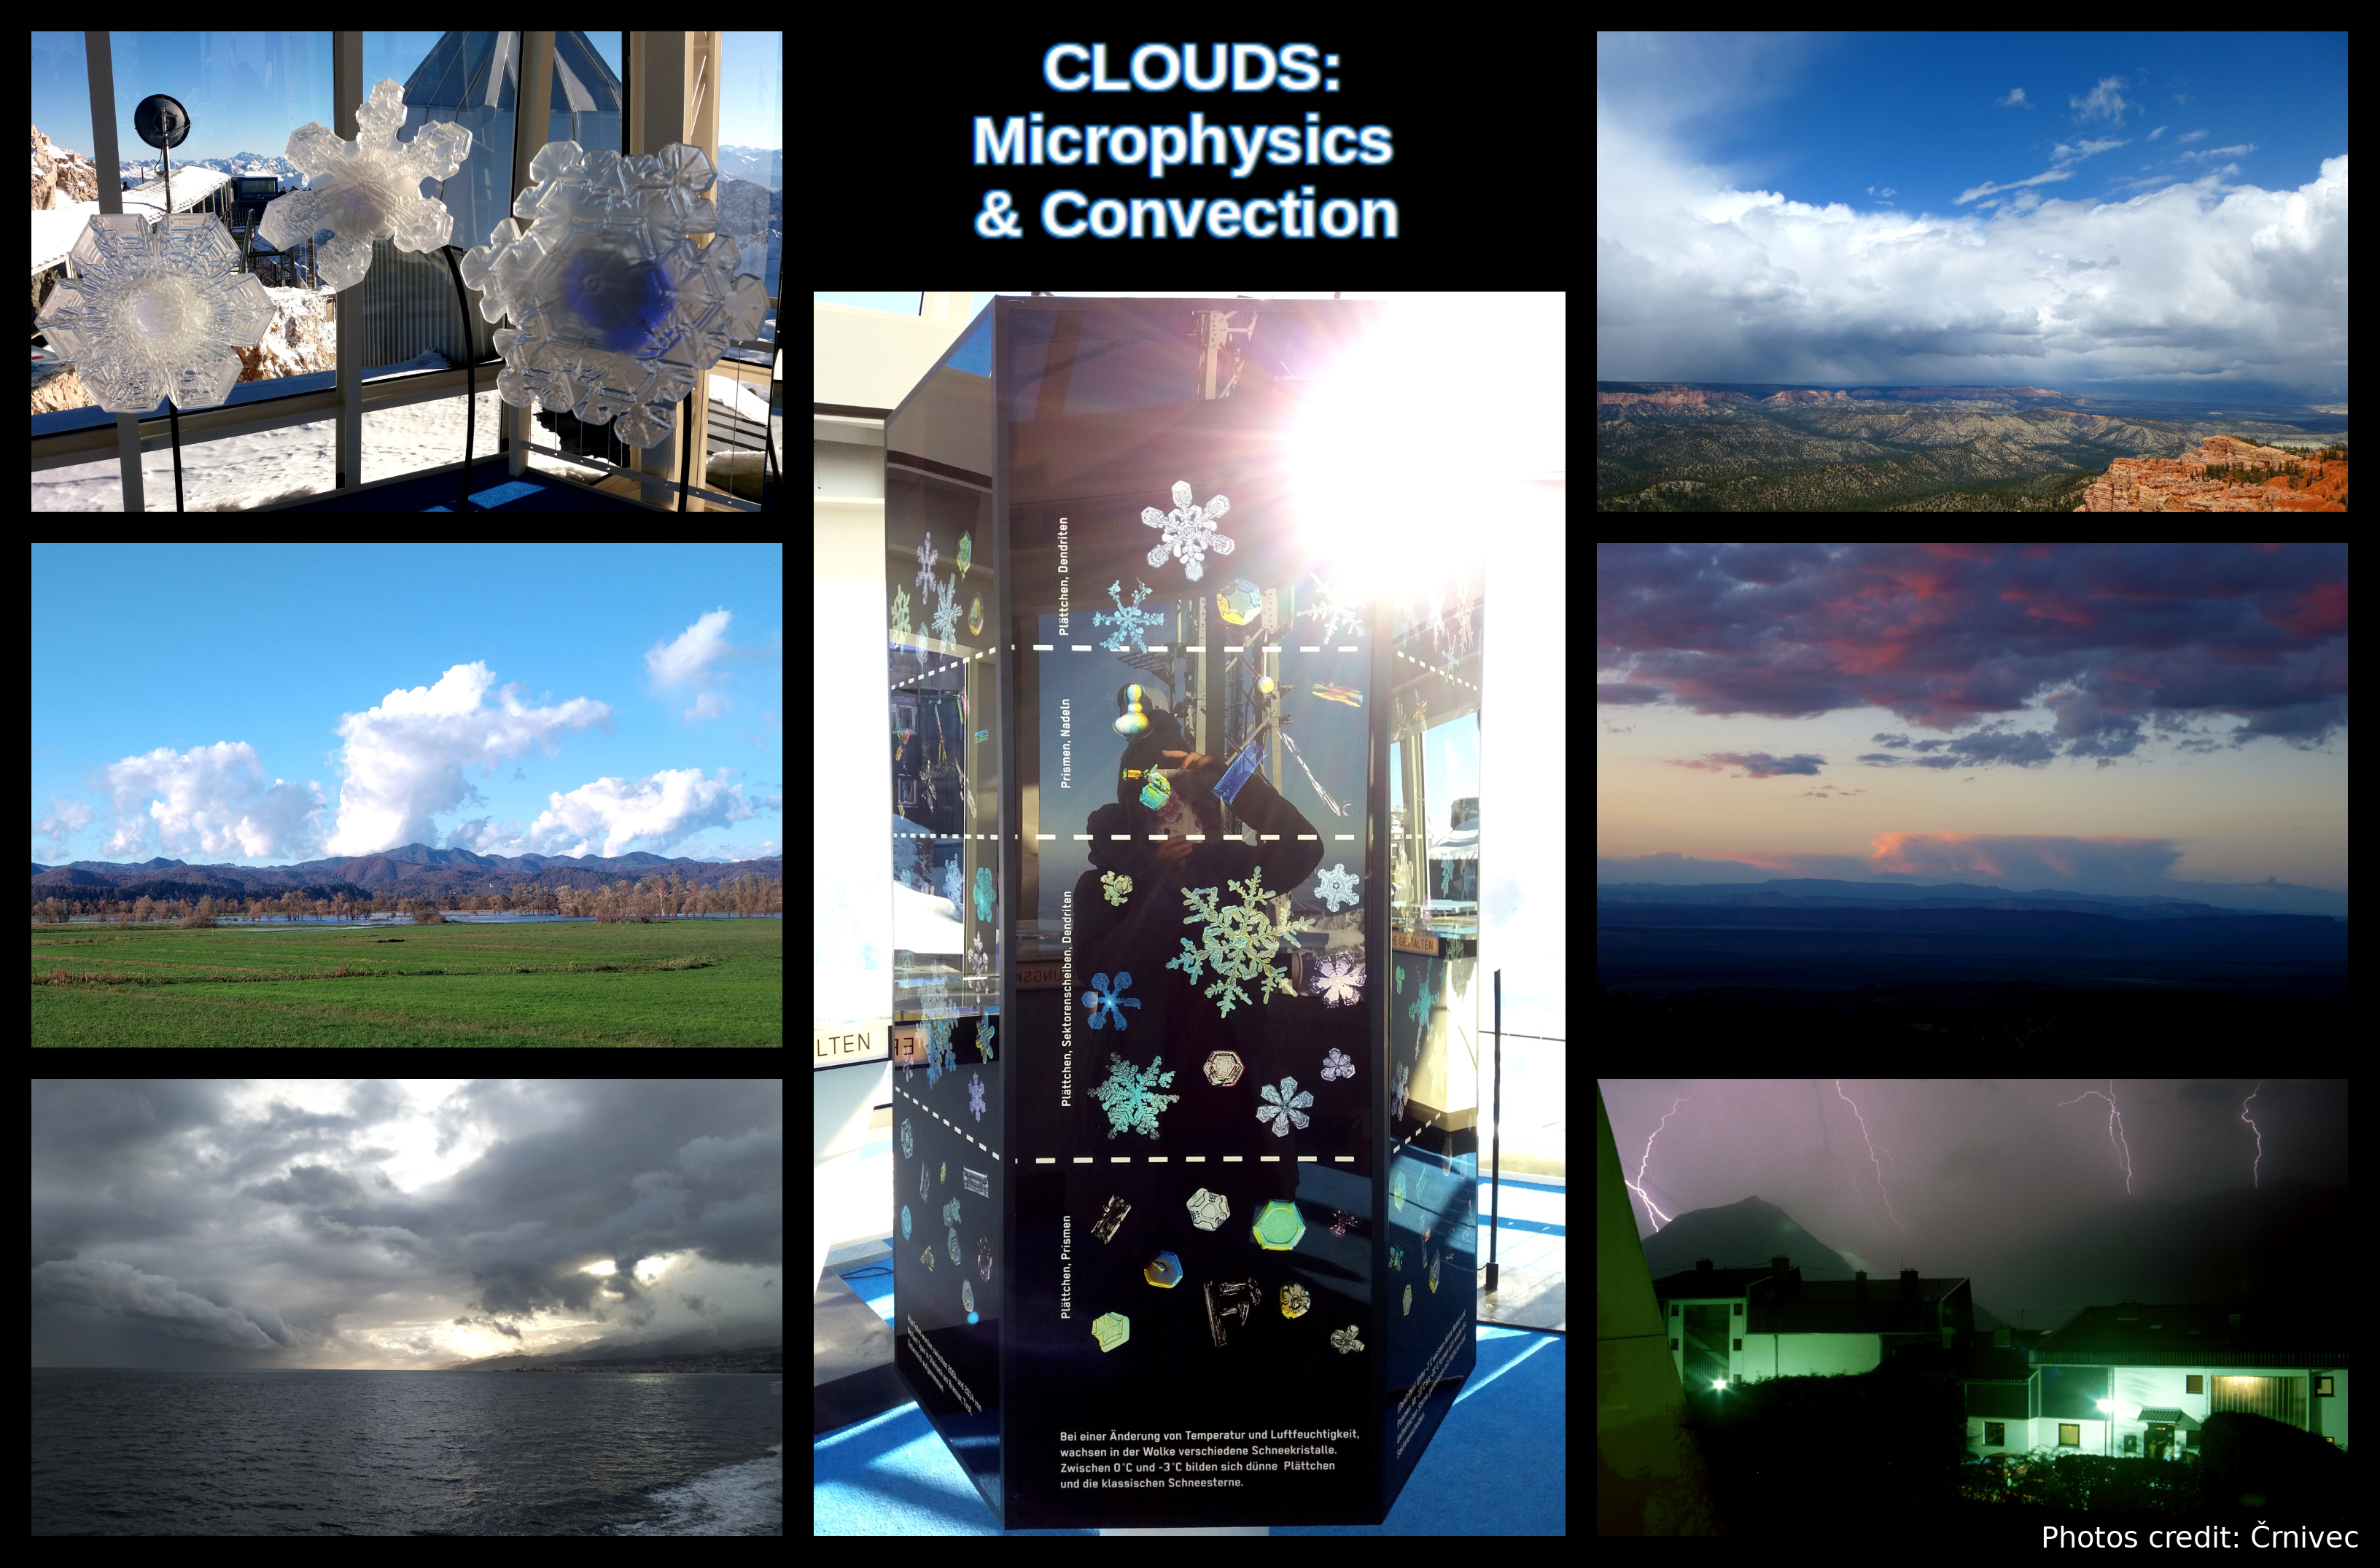 Clouds: Microphysics and Convection